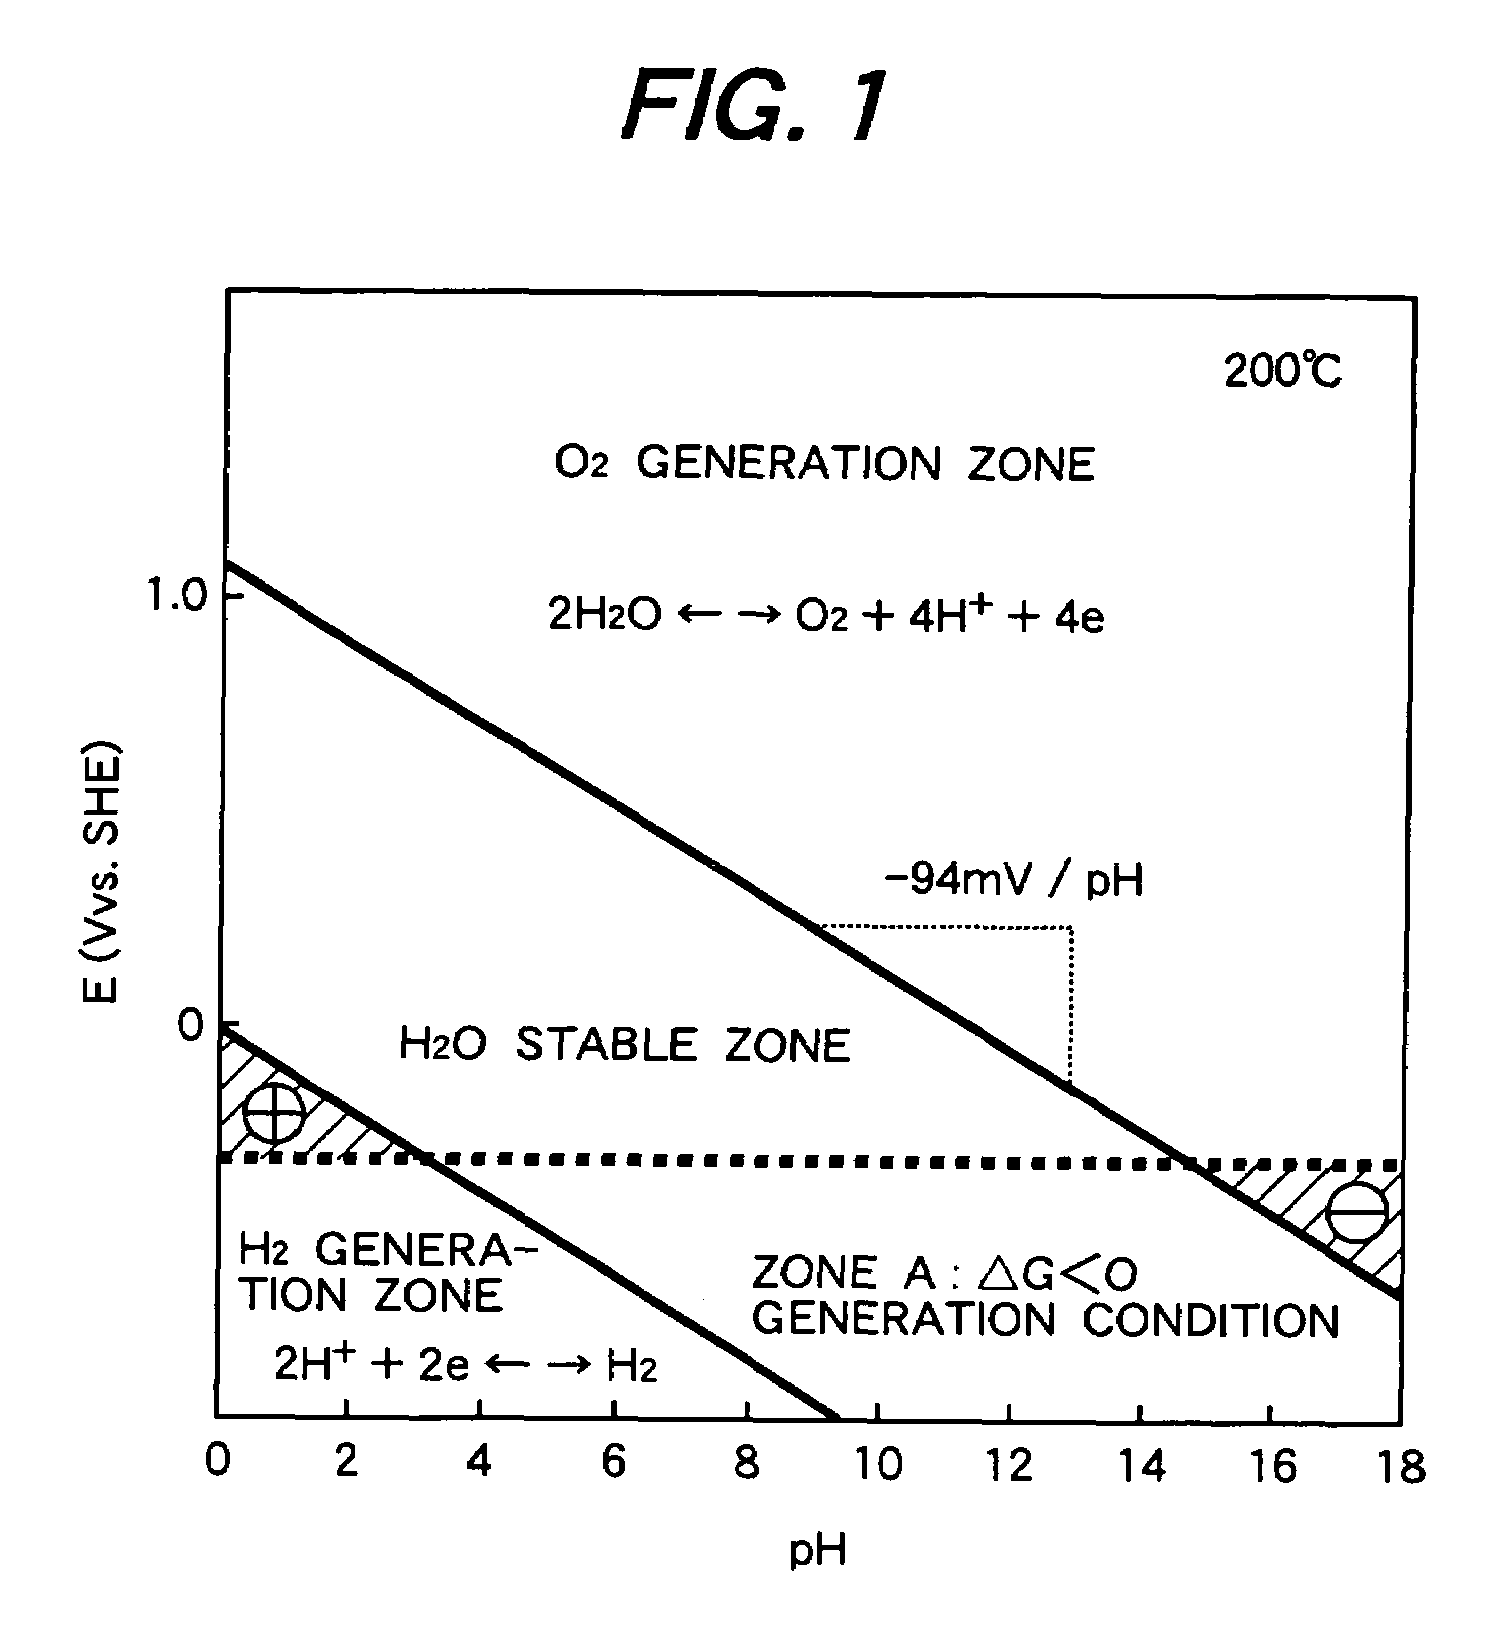 Method of catalytic decomposition of water